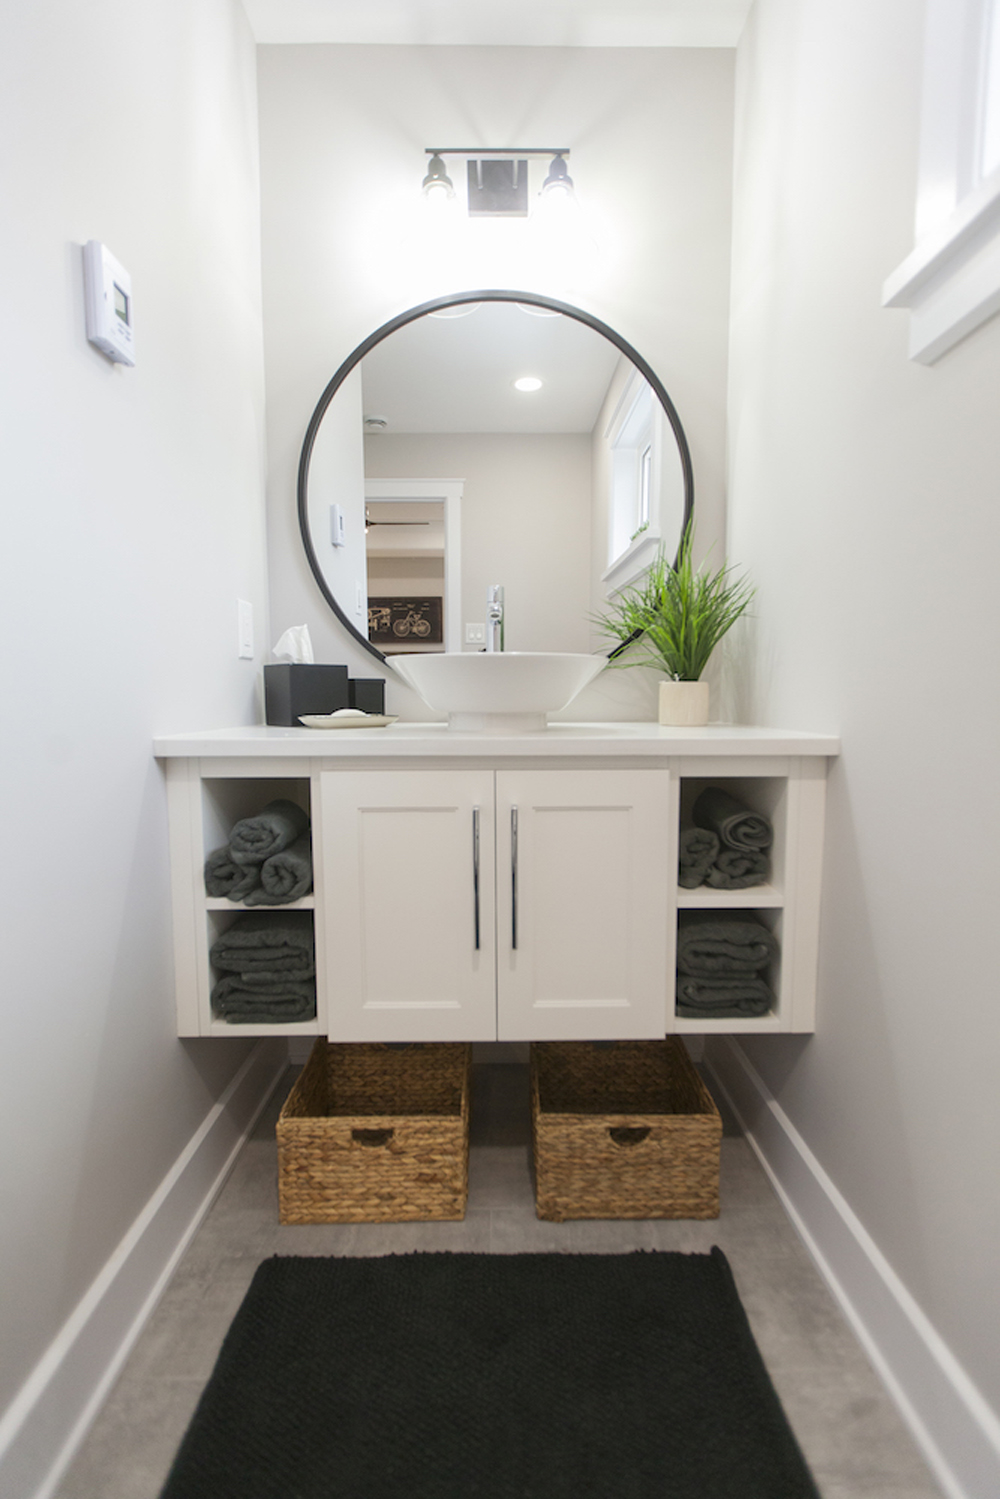 A custom-made white floating vanity in a tiny ensuite bathroom